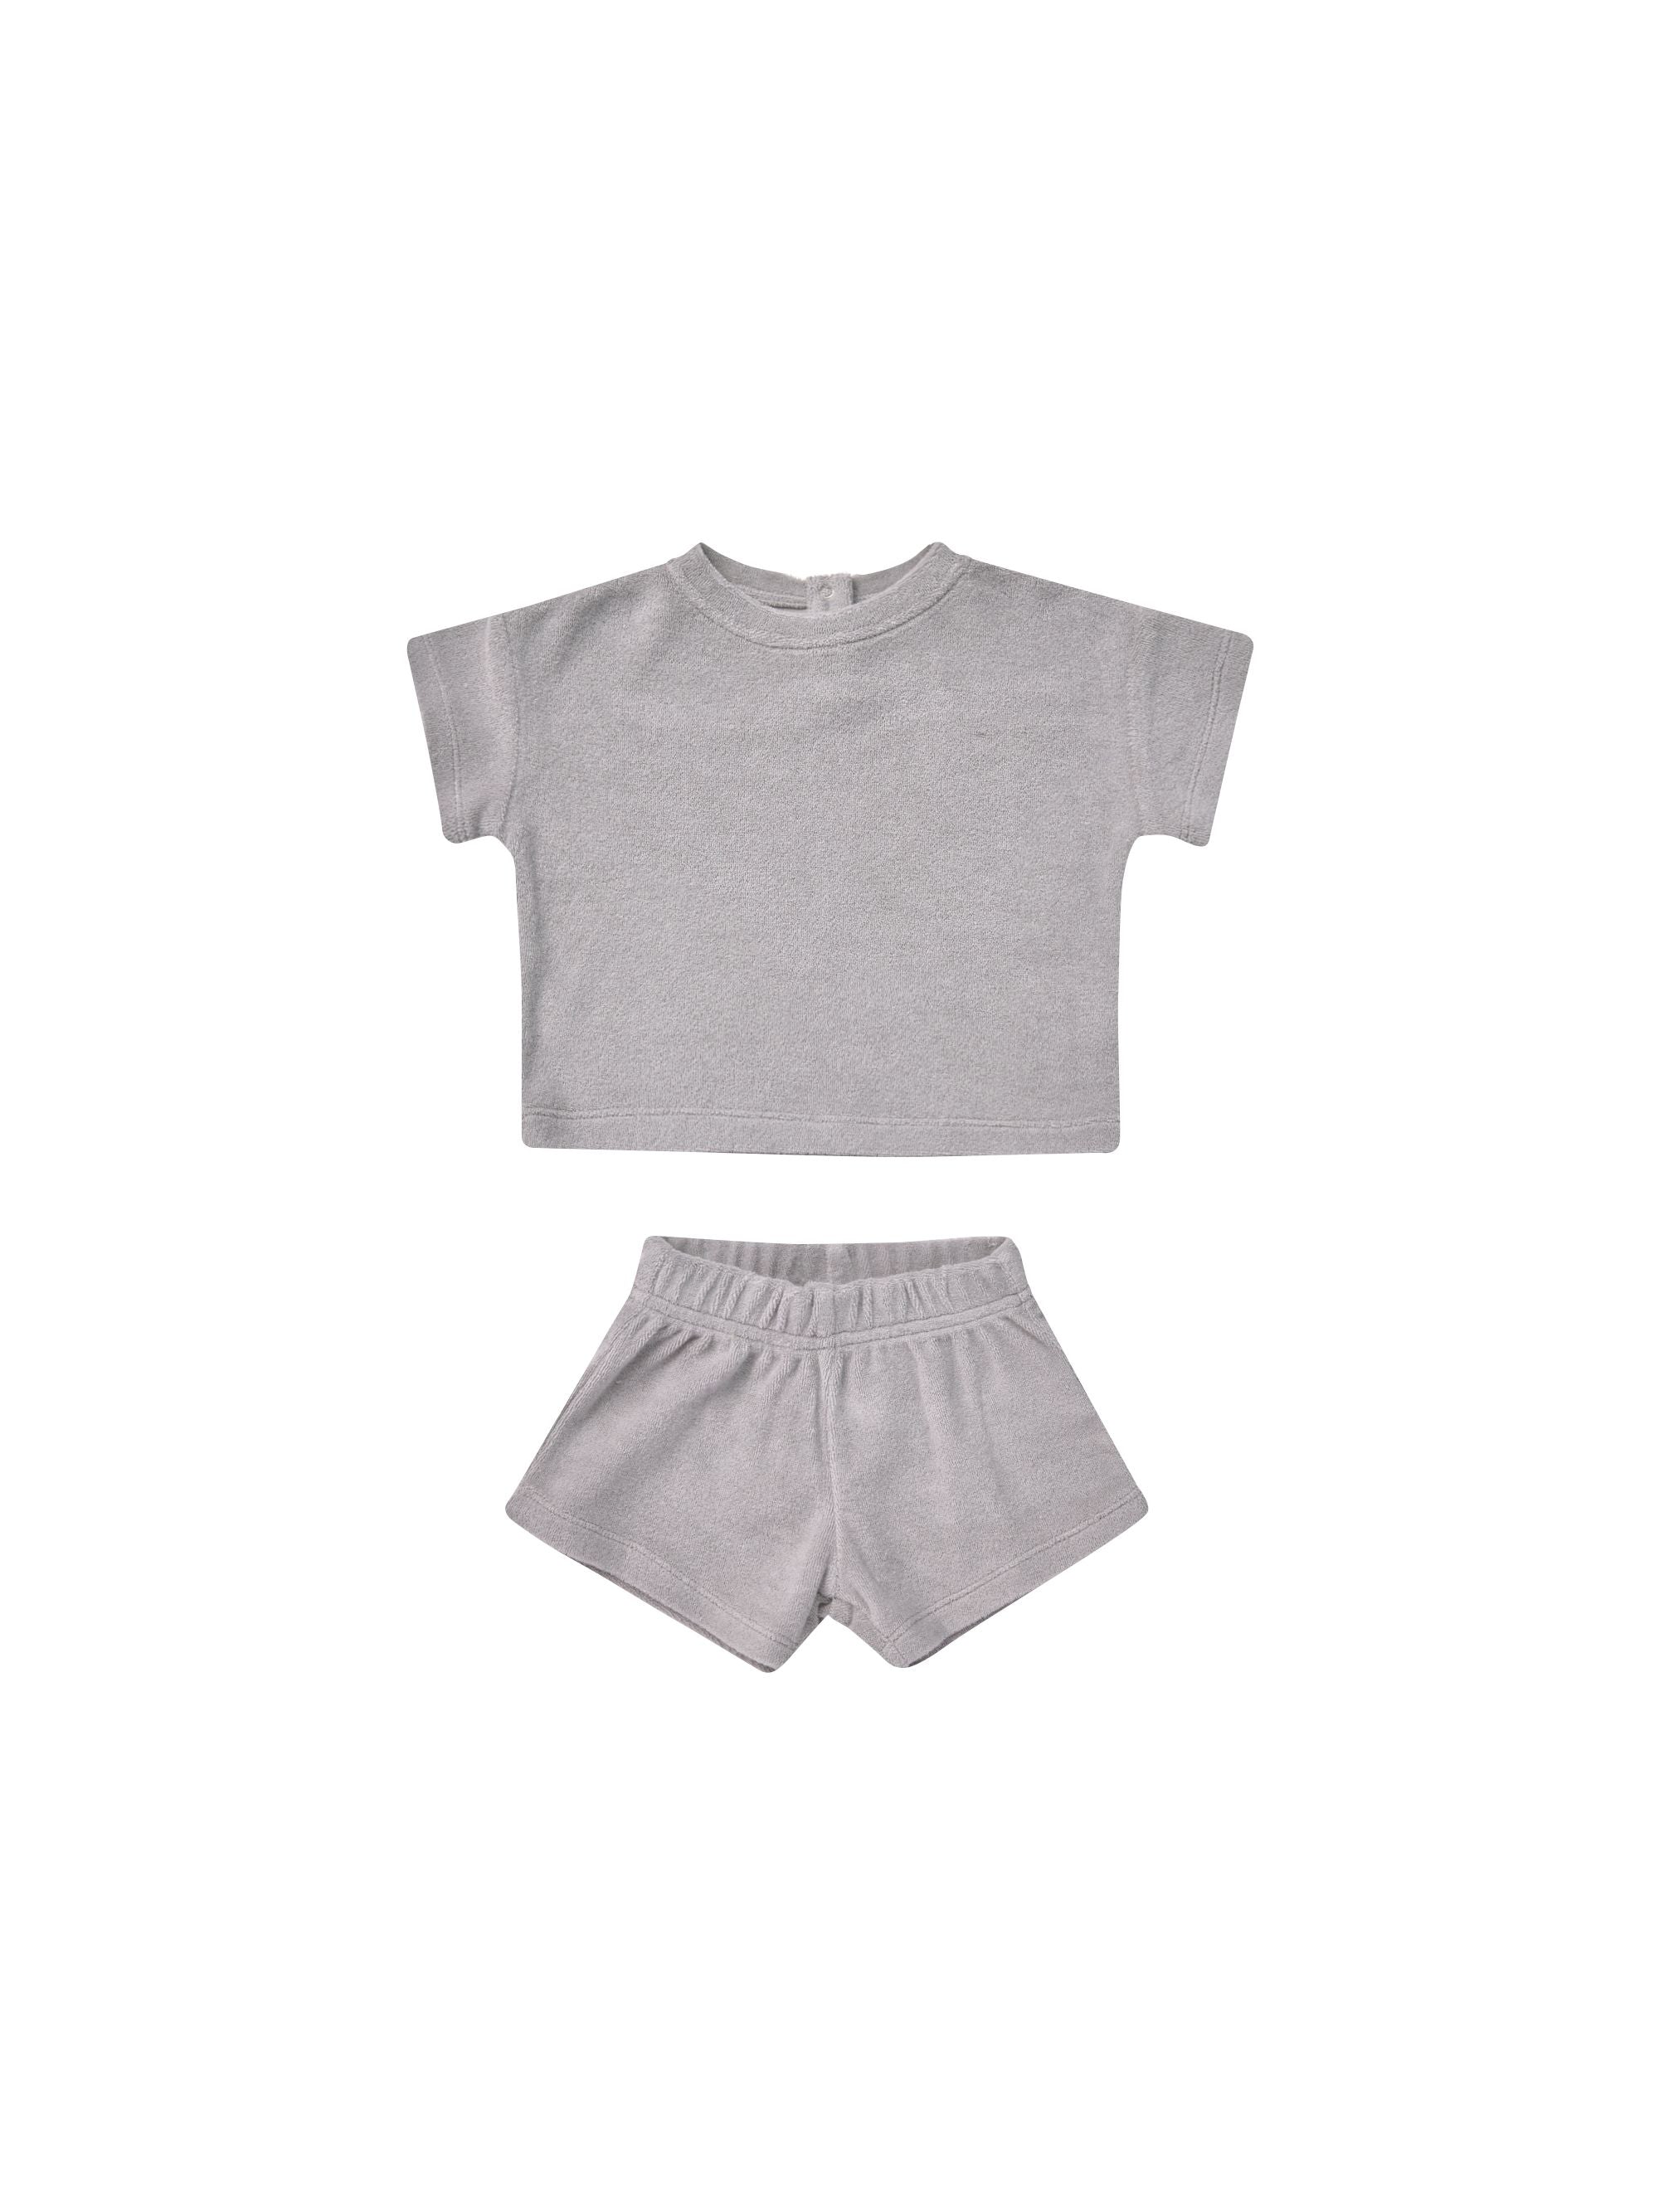 Quincy Mae Terry Tee and Shorts Set - Periwinkle – The Shoppe Miami